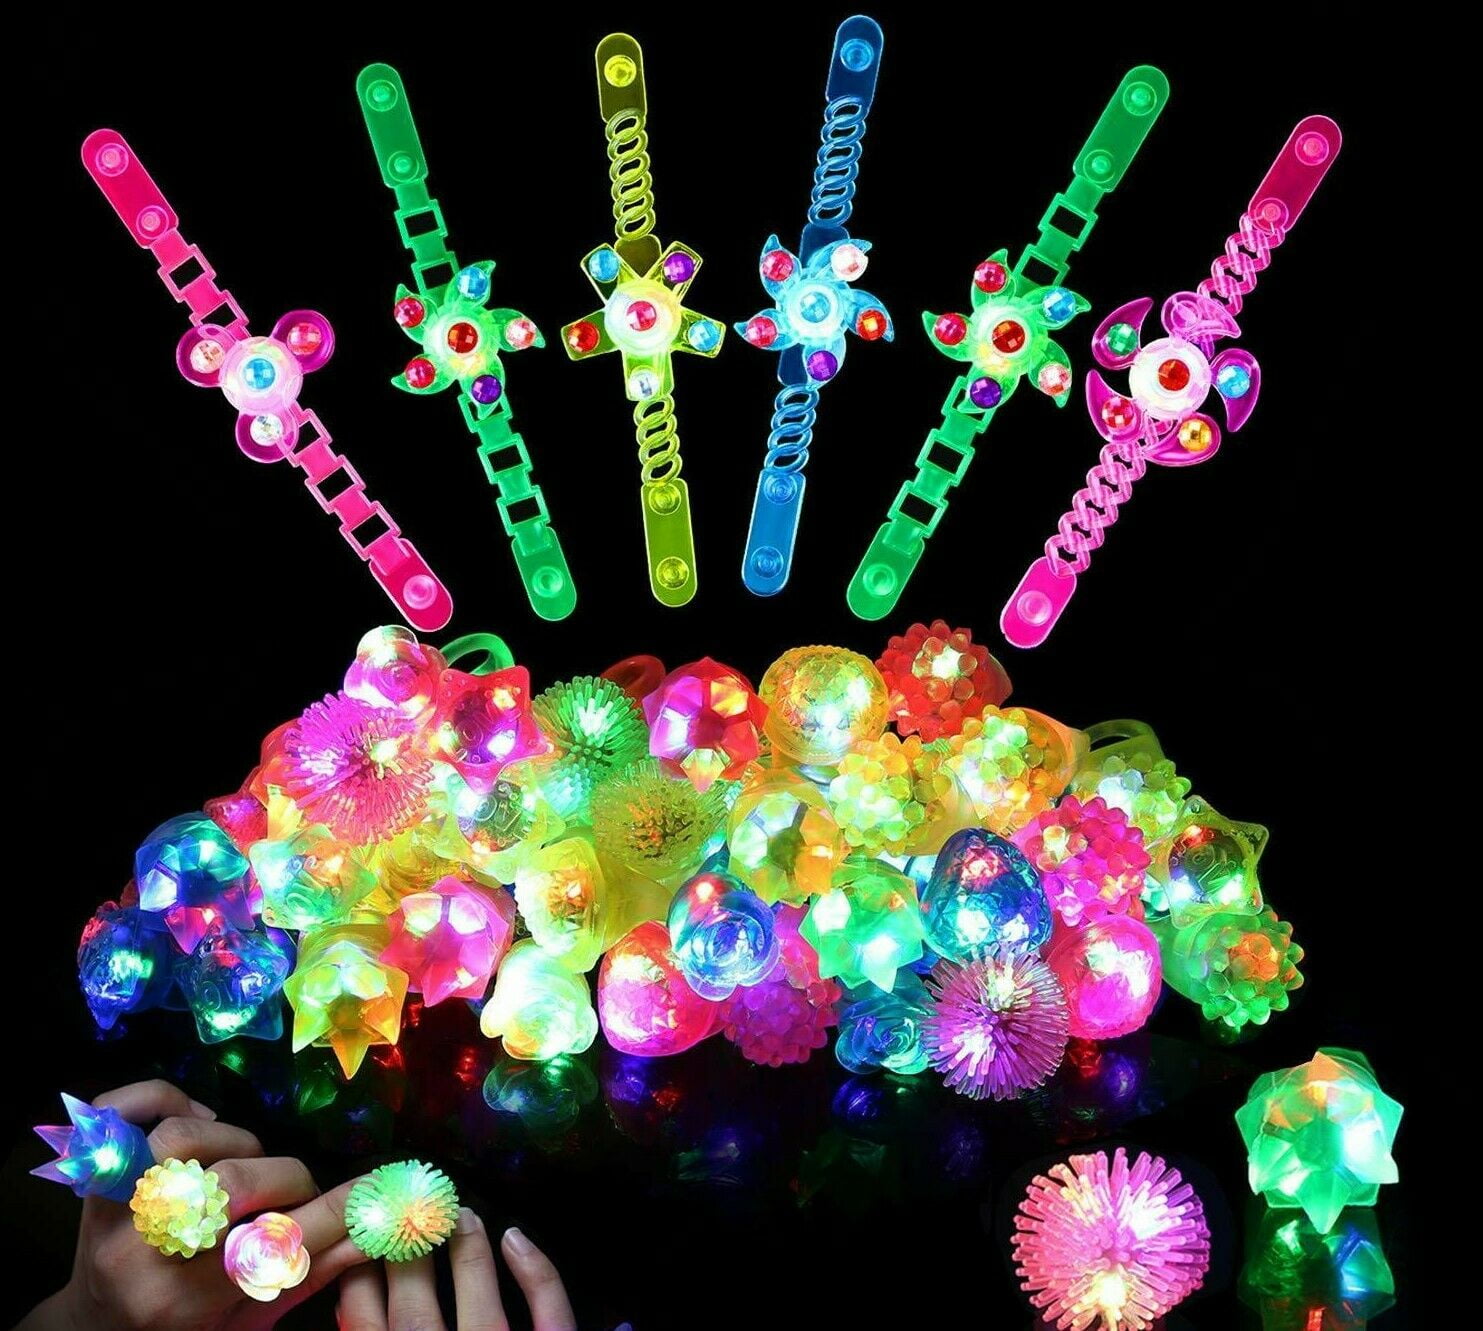 Party Favors for Kids-12 Pack LED Light Up Toys Glow in The Dark Party Supplies for Kids Boys Girls Prizes Box Toys for Classroom Hand Spin Stress Relief Anxiety Toys FOR Birthday Celebration 